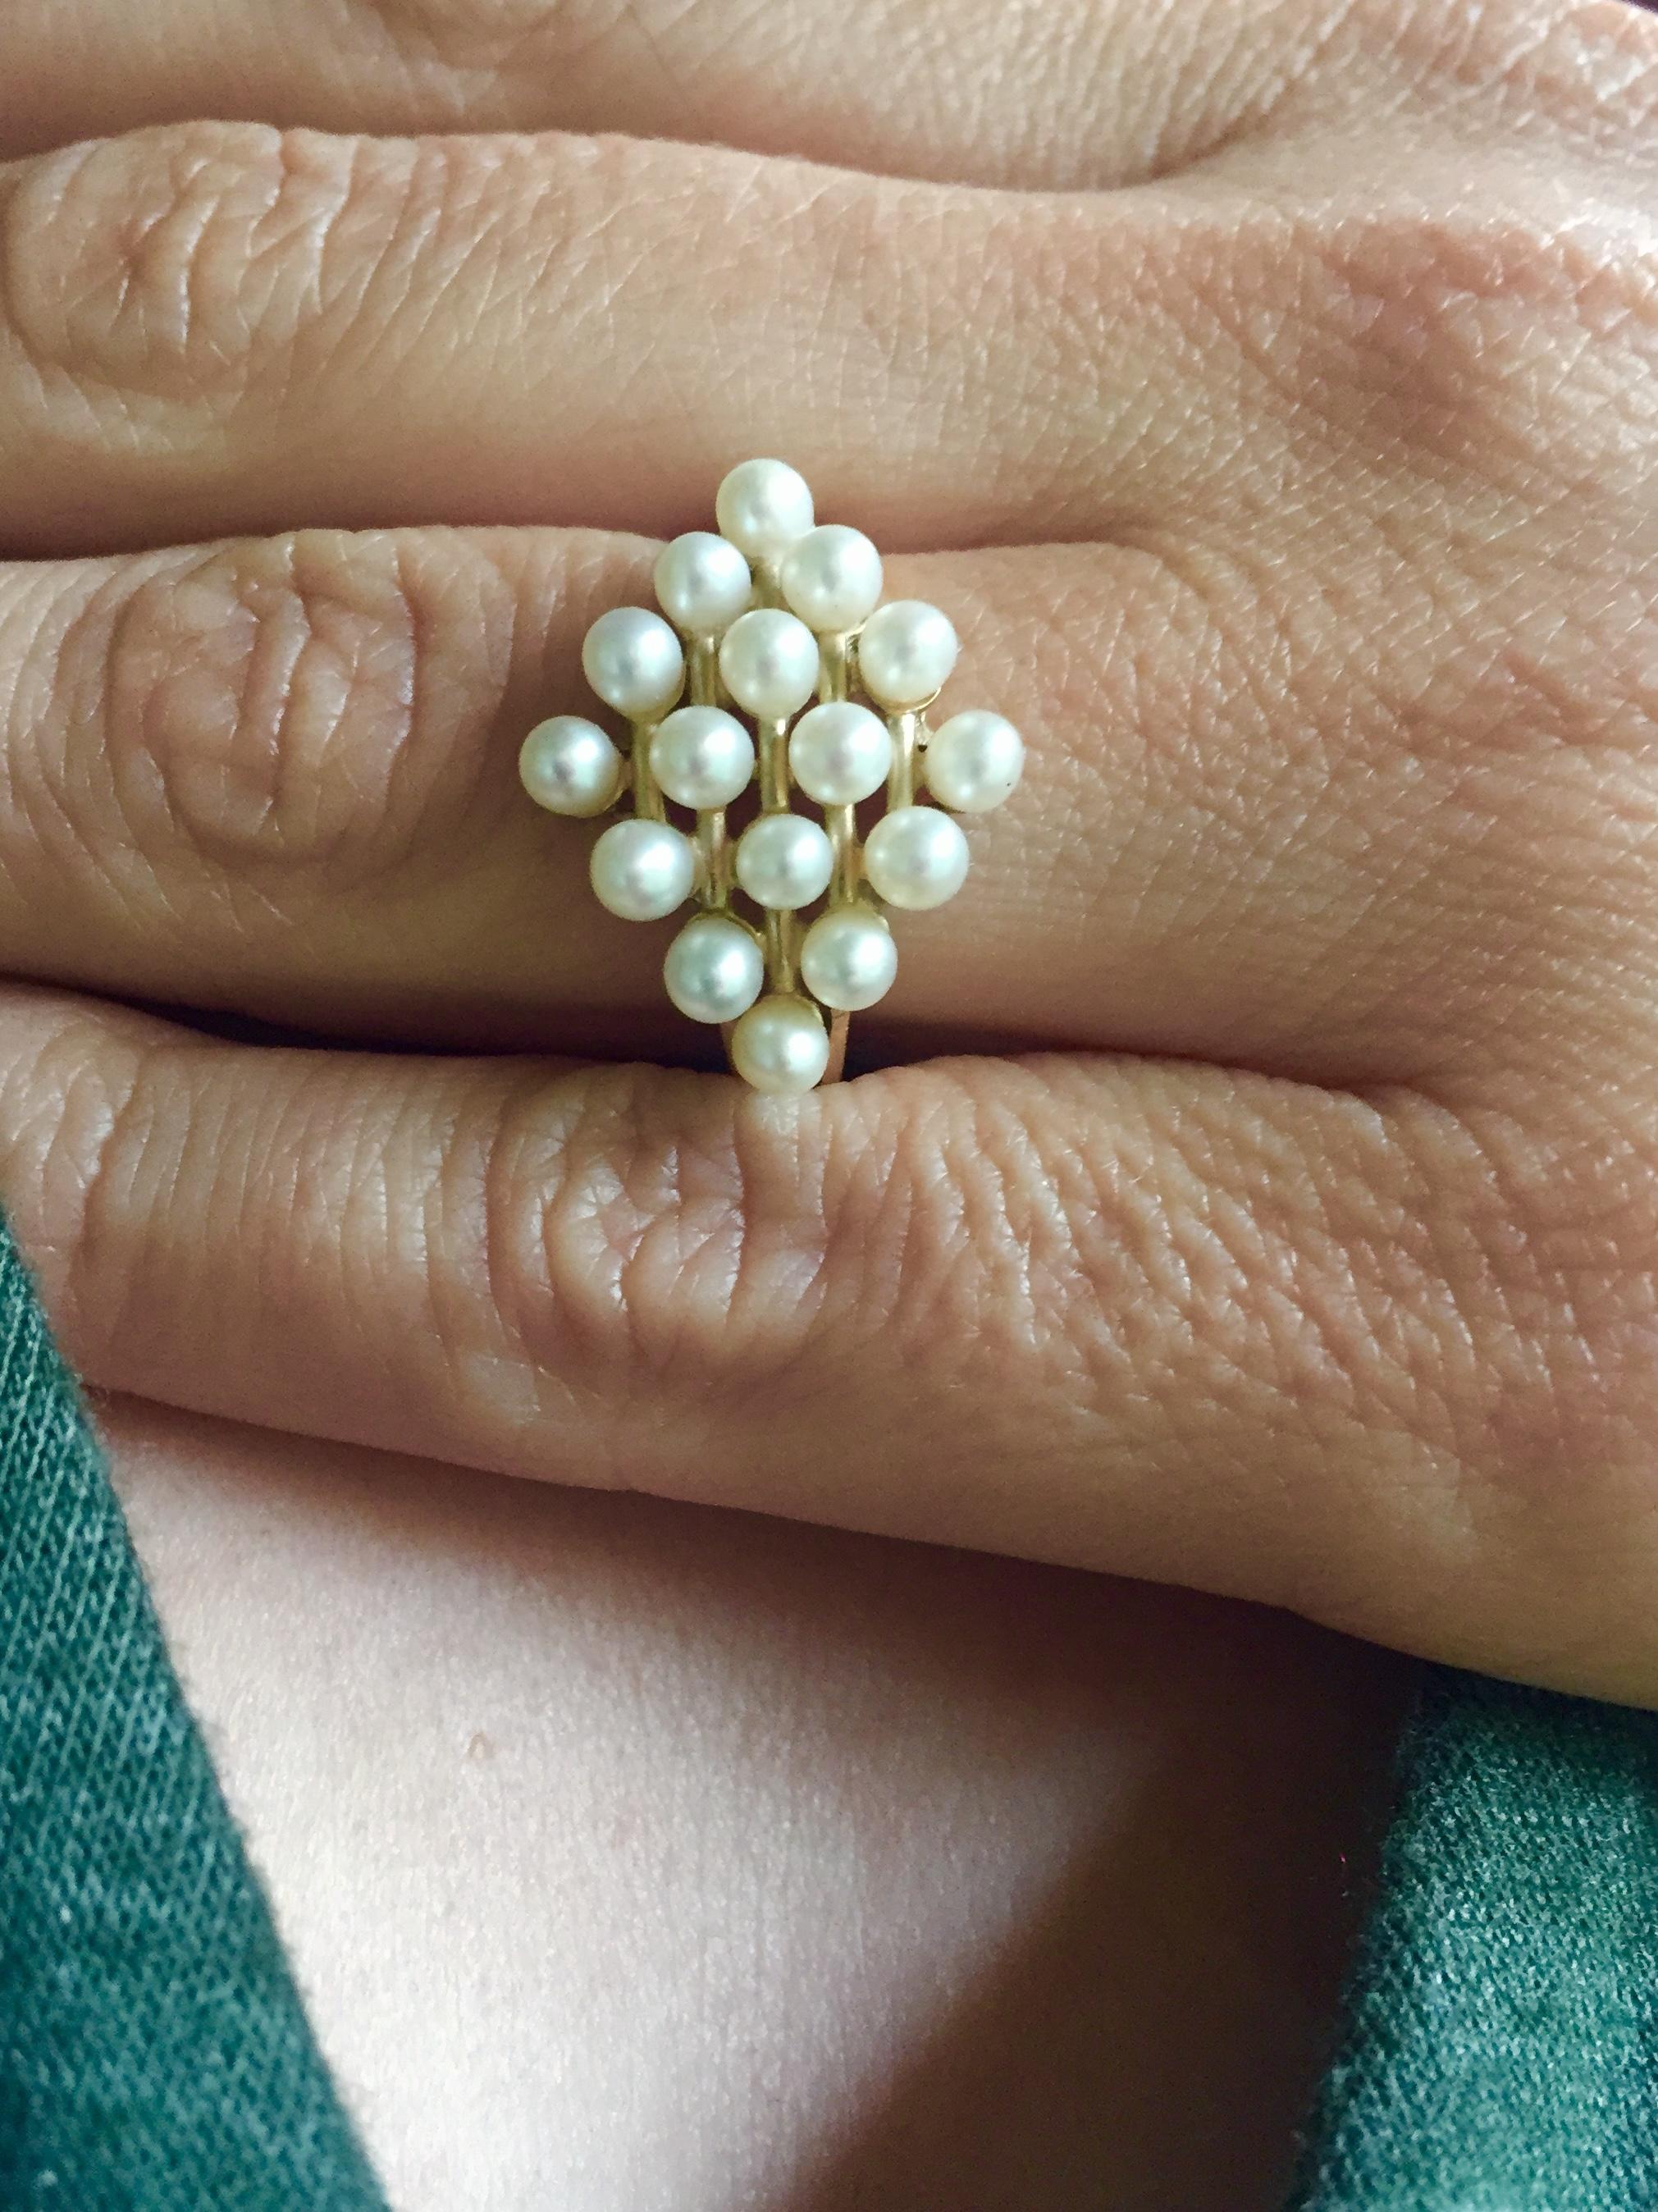 This white pearl and 14k yellow gold ring is size 8. With a diamond-shaped design consisting of glowing round white pearls, 14k yellow gold setting, and ring, this ring is an elegant choice. It is classic with white pearls and yellow gold, yet